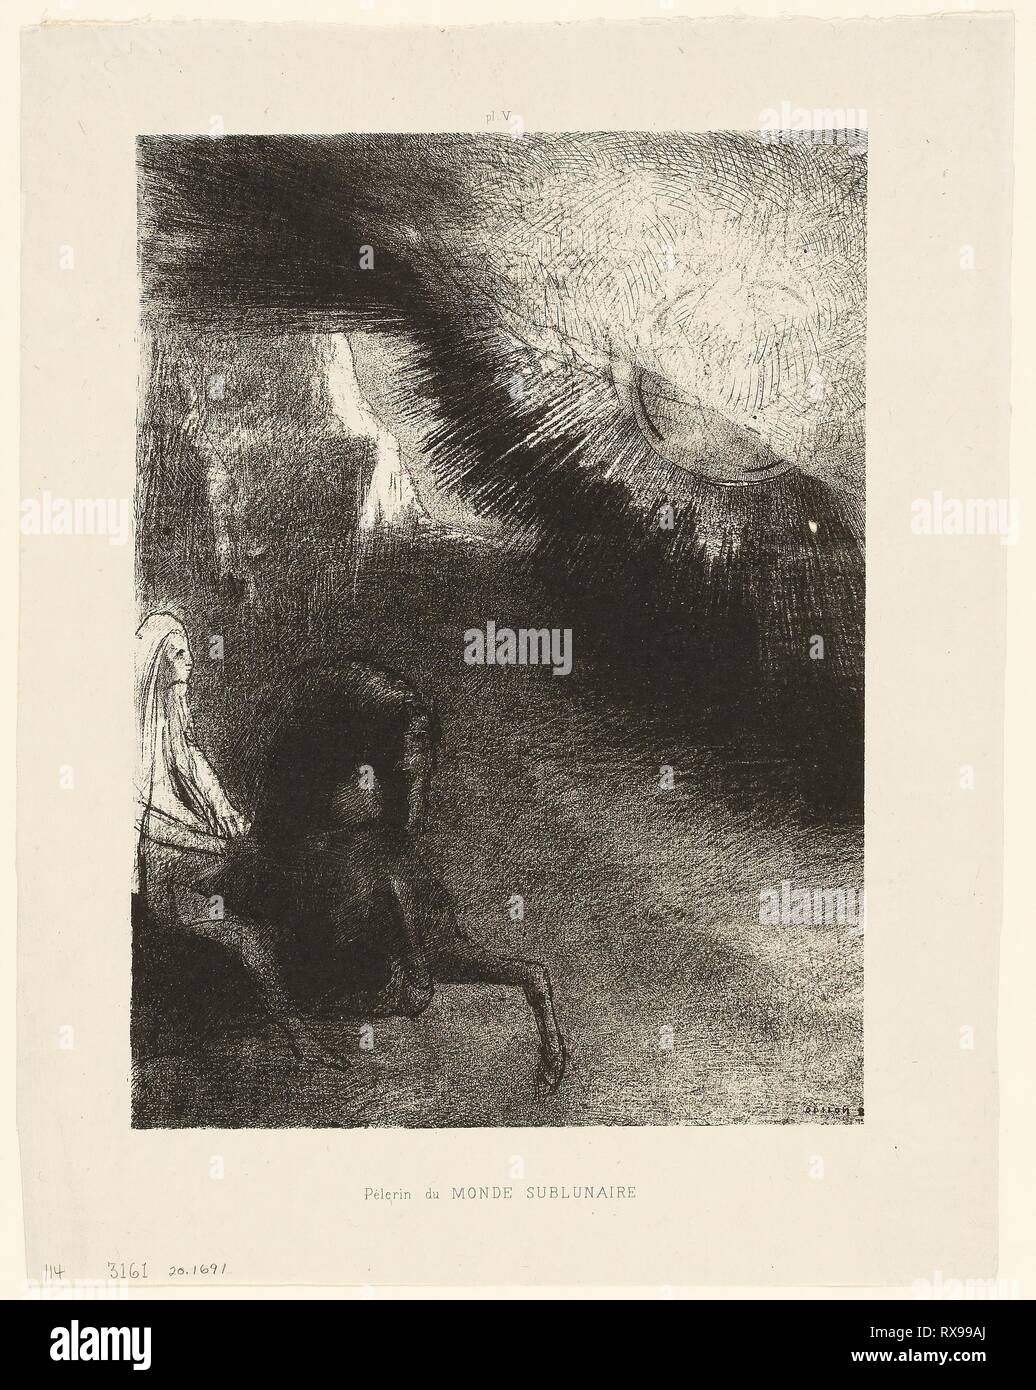 Pilgrim of the Sublunary World, plate 5 of 6. Odilon Redon; French, 1840-1916. Date: 1891. Dimensions: 274 × 201 mm (image); 349 × 267 mm (sheet). Lithograph in black on light gray chine. Origin: France. Museum: The Chicago Art Institute. Stock Photo